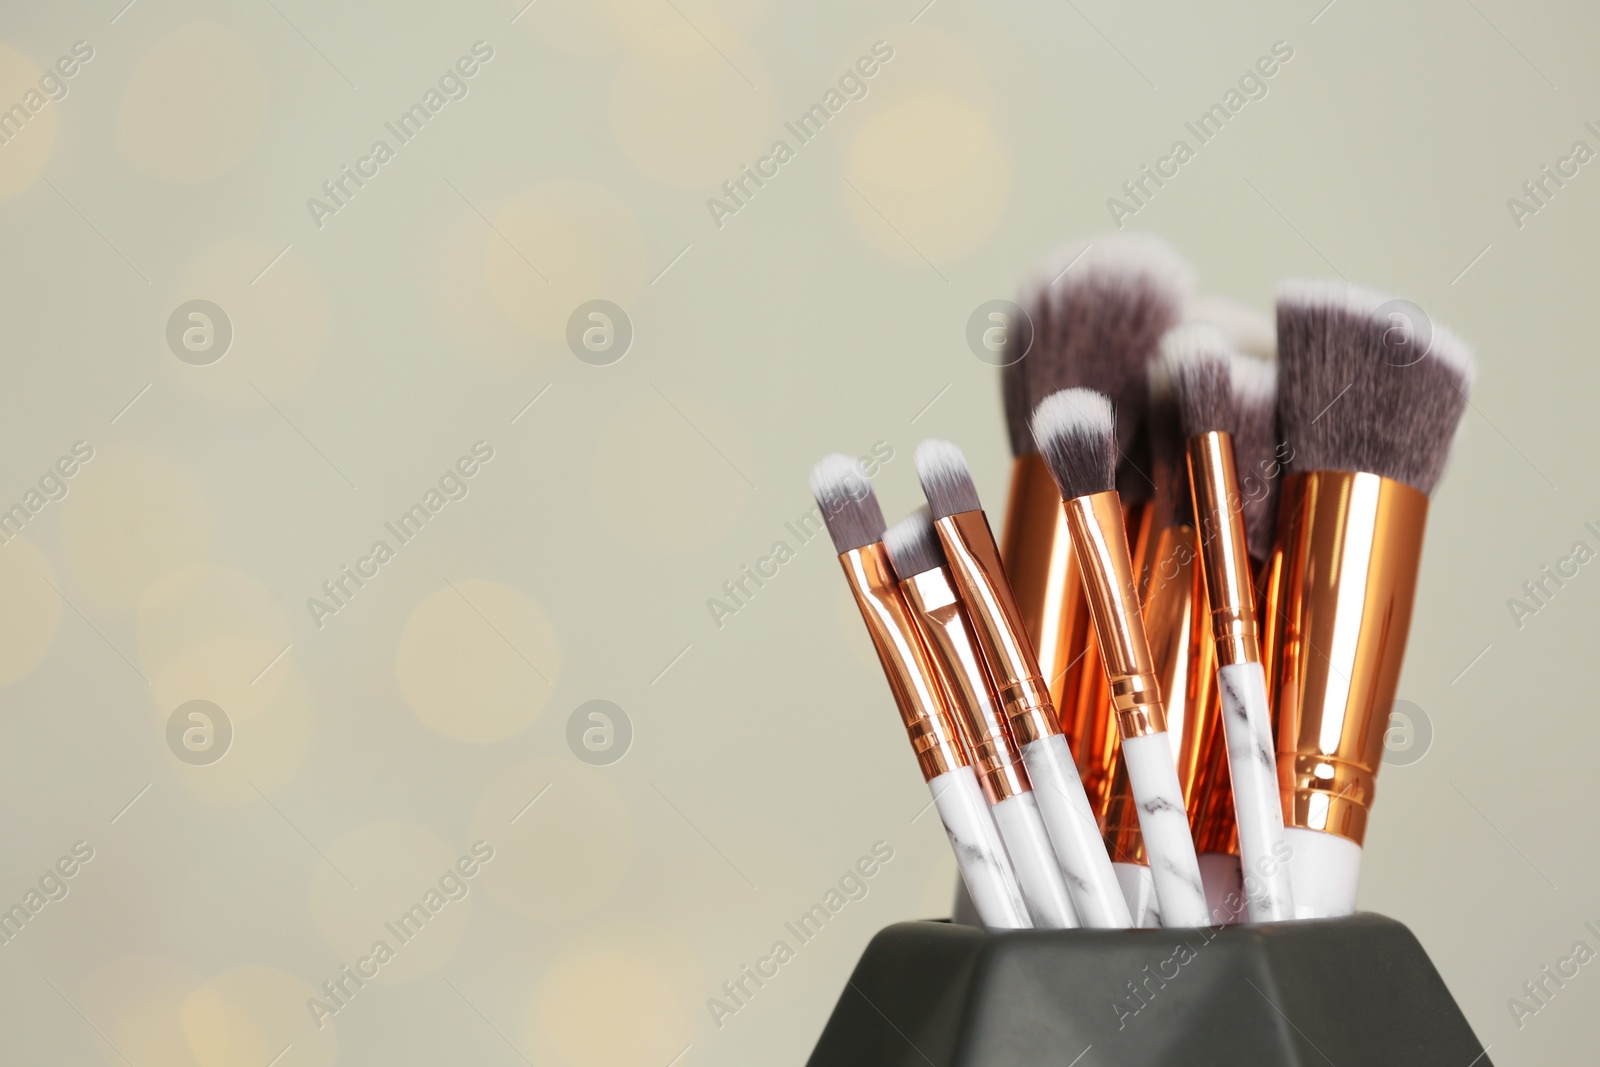 Photo of Set of makeup brushes in holder on light background. Space for text